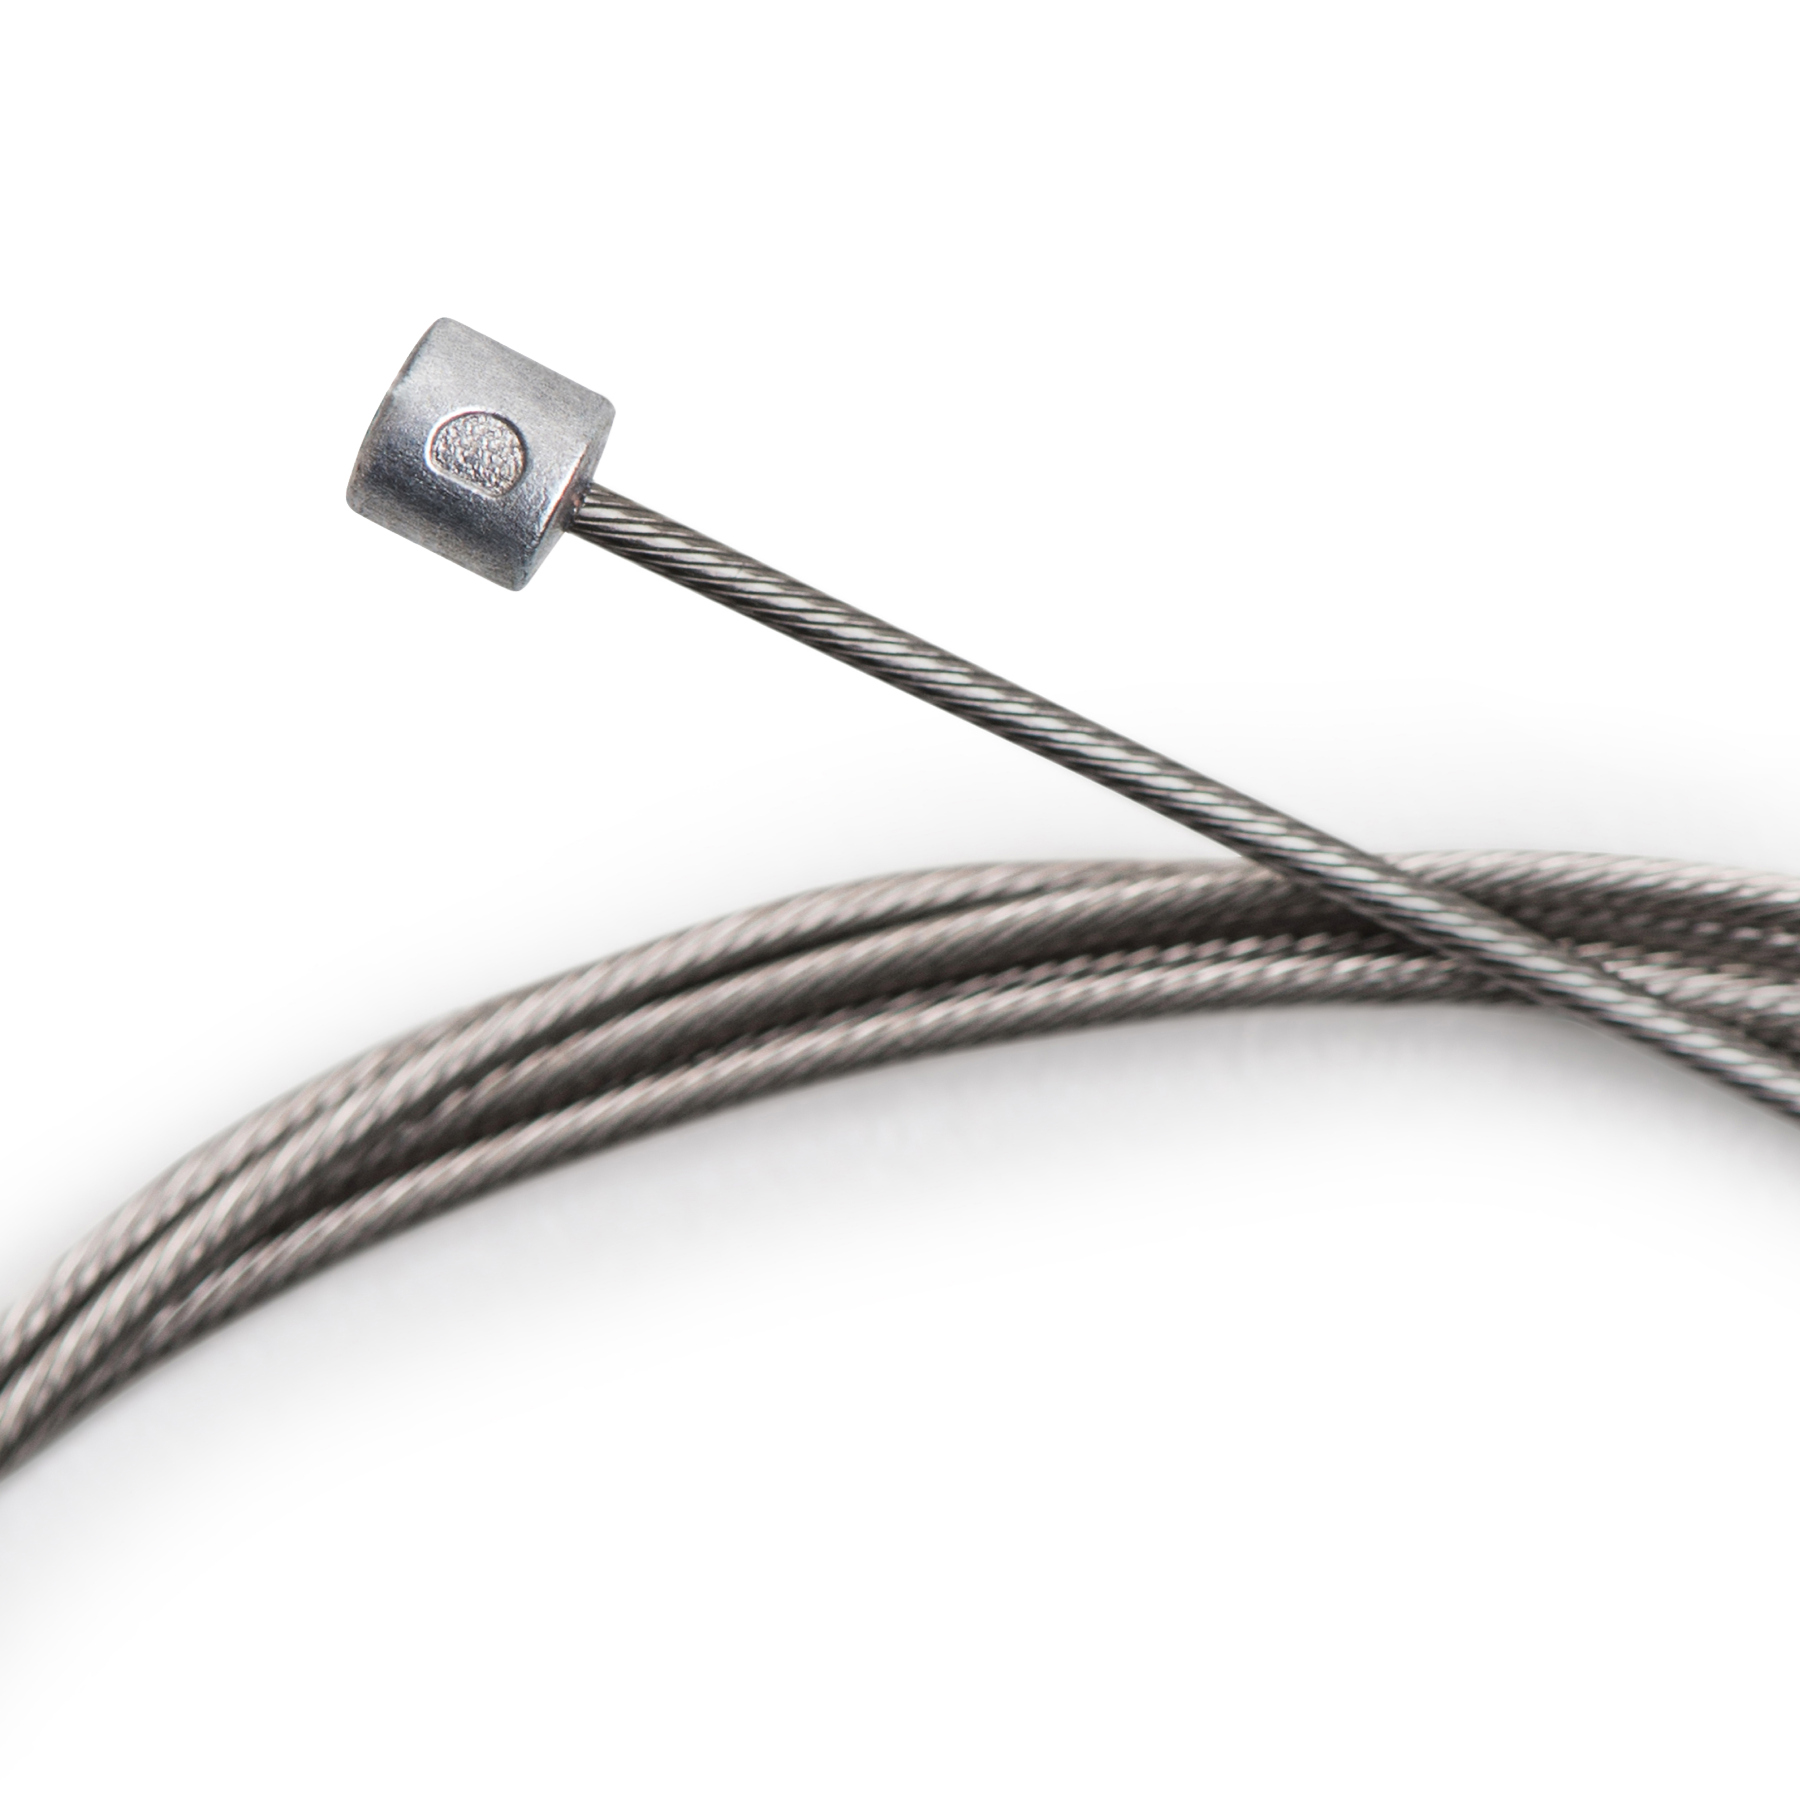 Productfoto van capgo Orange Line Shift Cable - 1.1 mm - Stainless Steel / Speed Slick - 2200 mm - Campagnolo